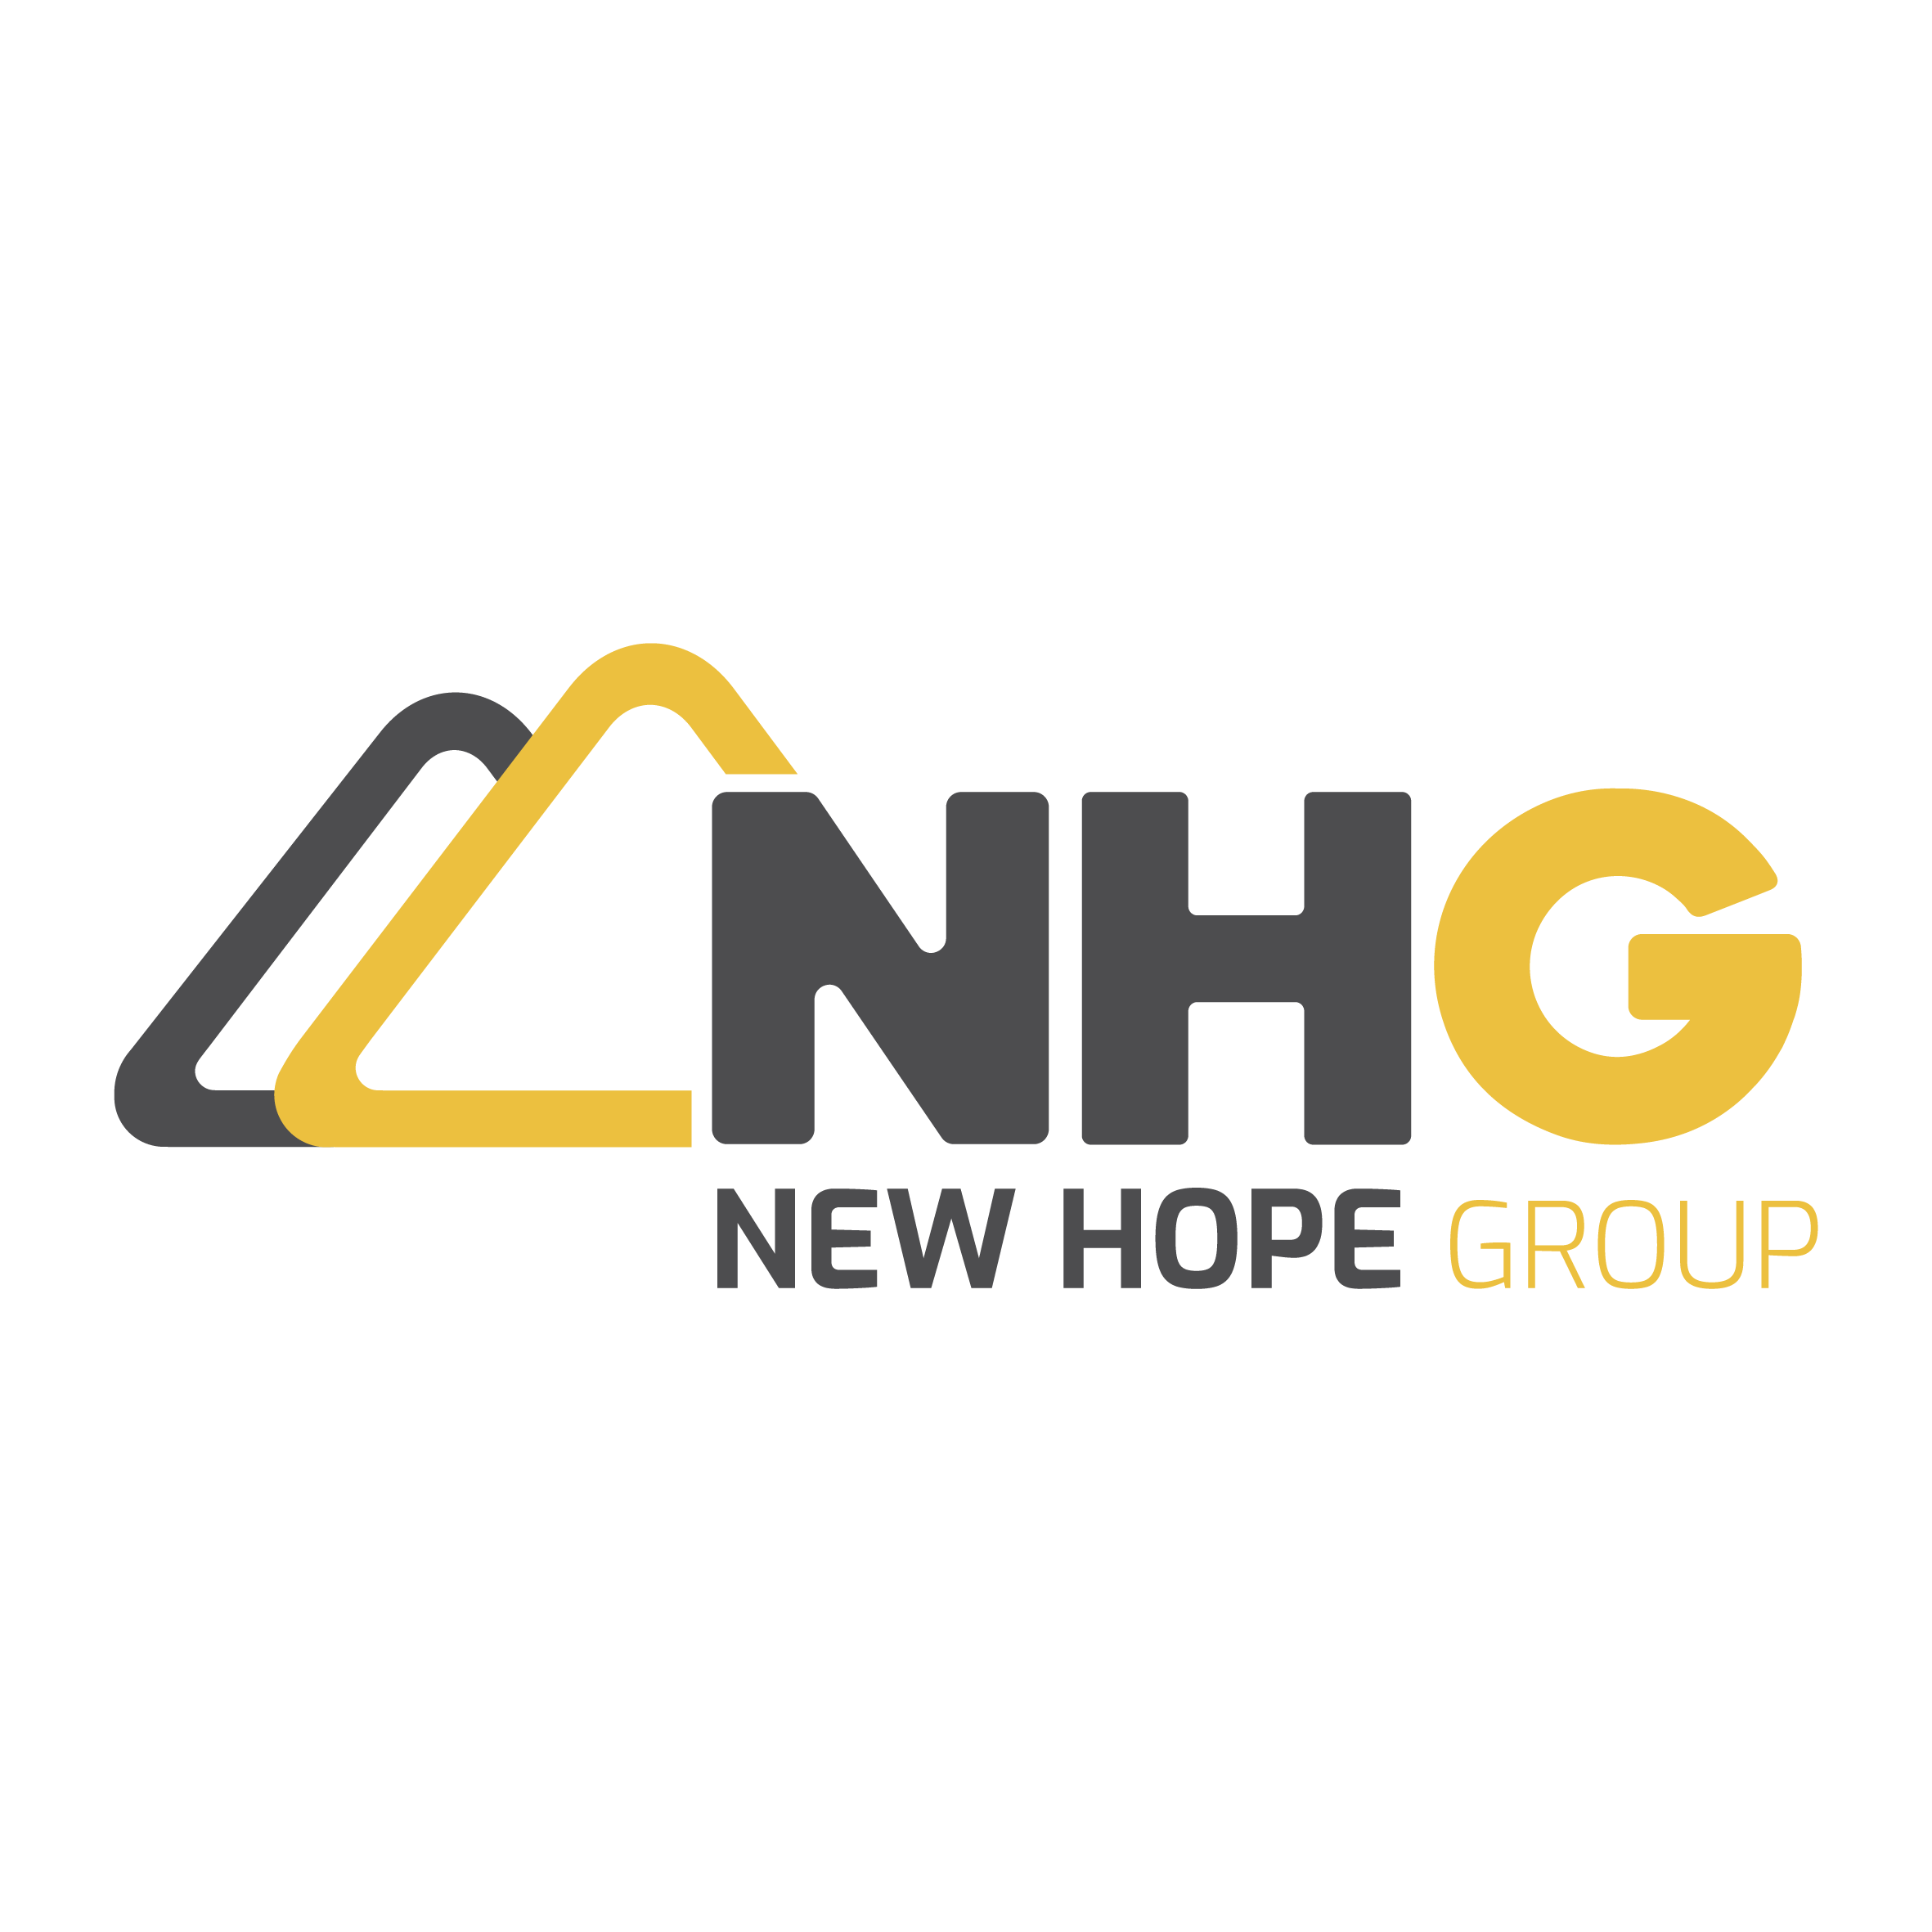 New Hope Group